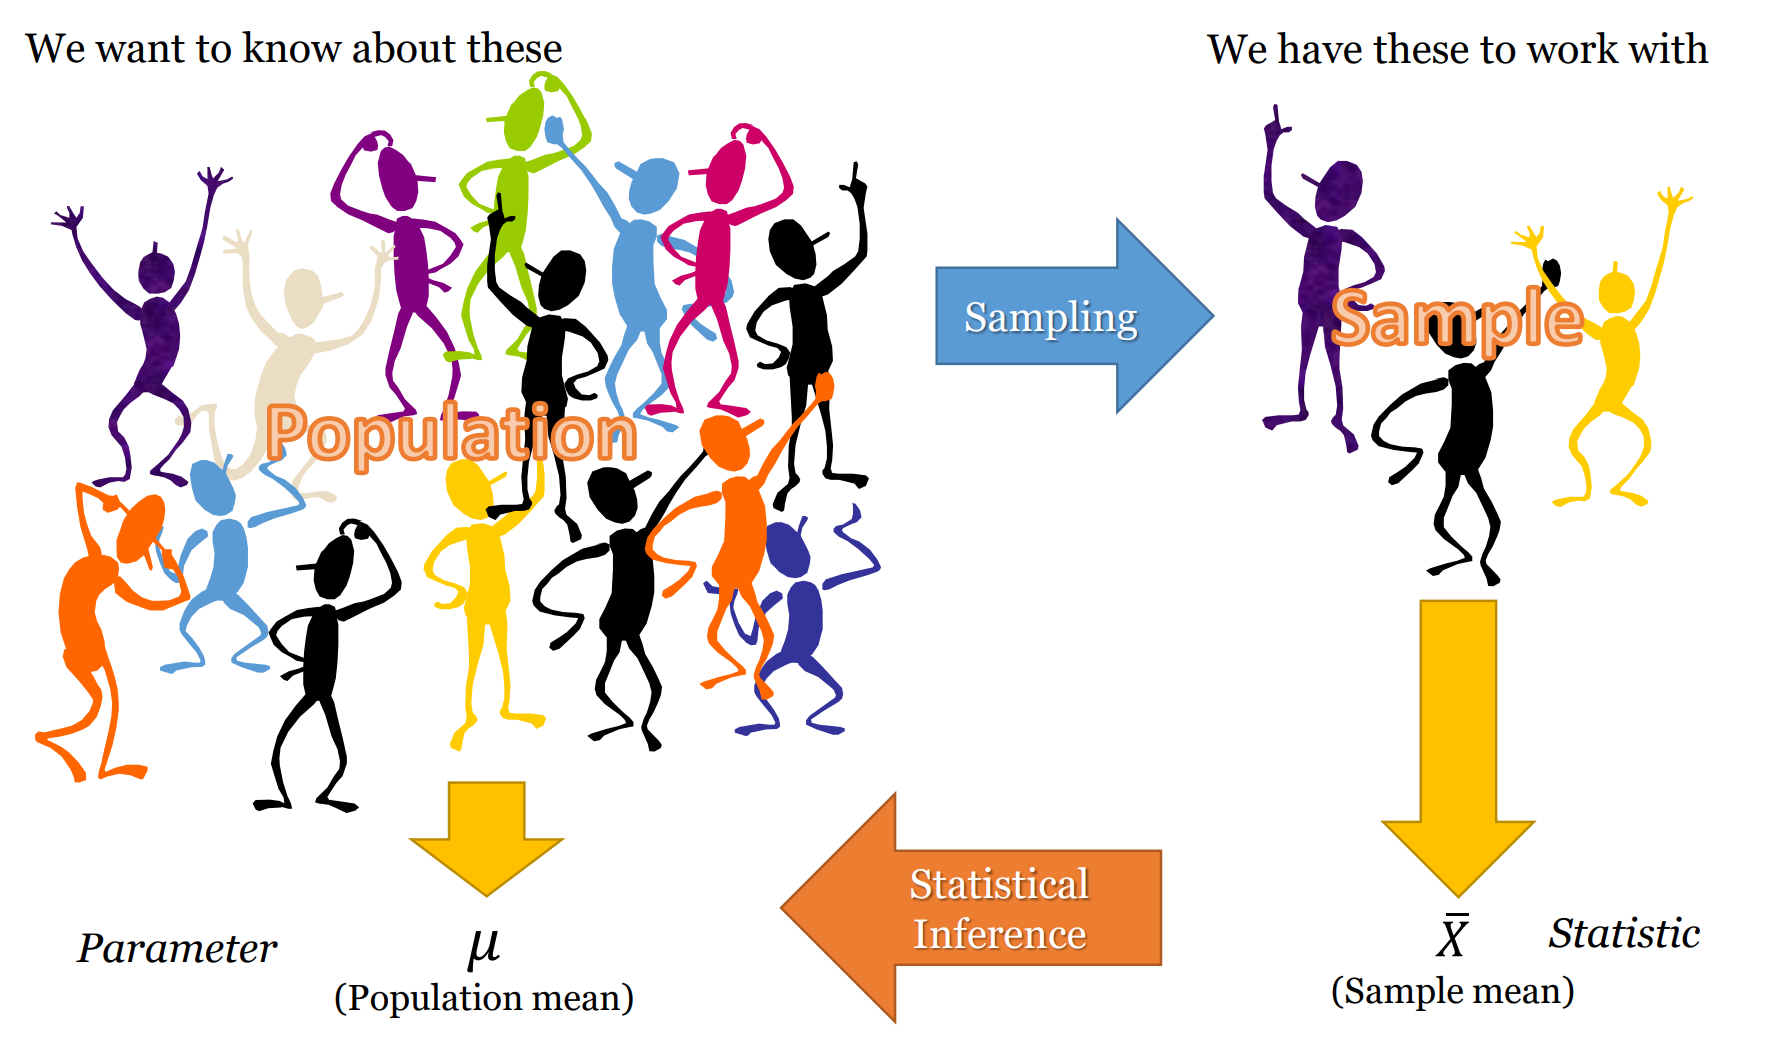 The Population and The Sample